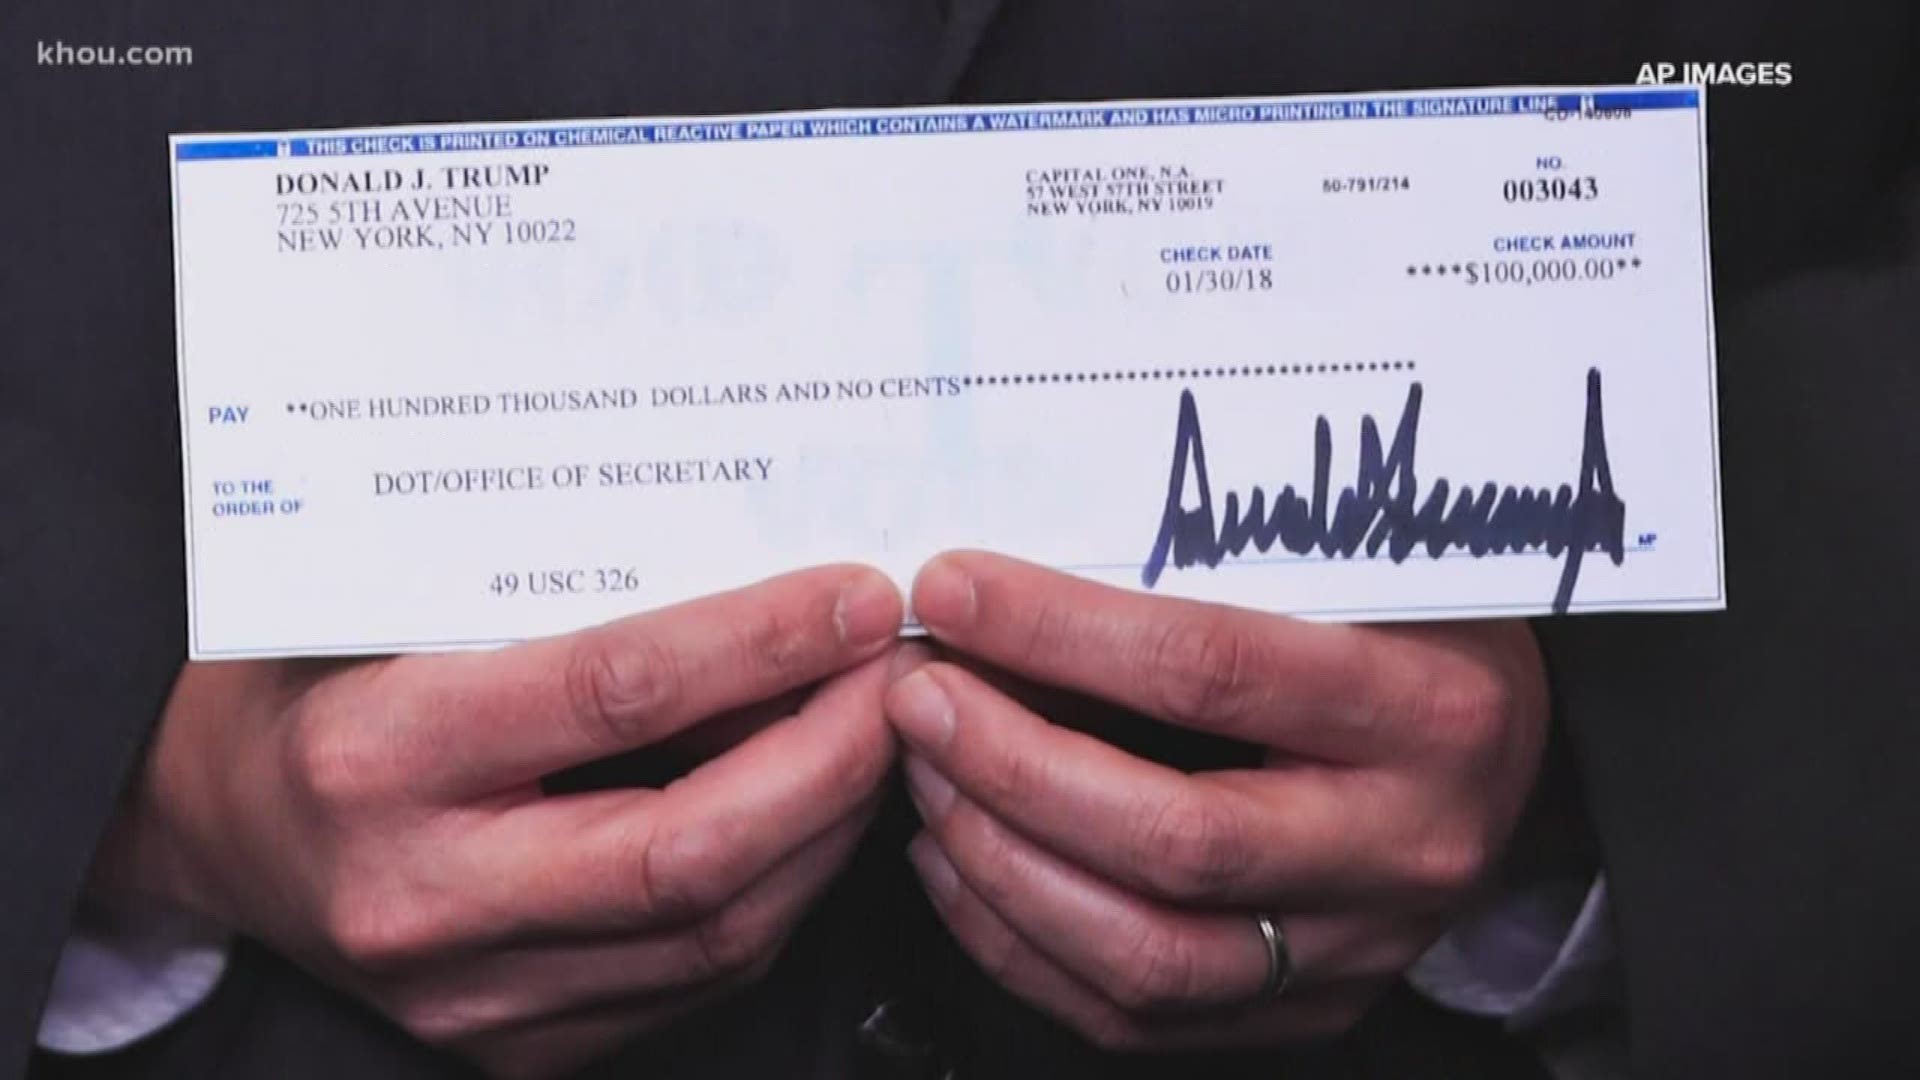 The president donates his presidential salary to worthy causes, but a post making claims about where it goes is false.